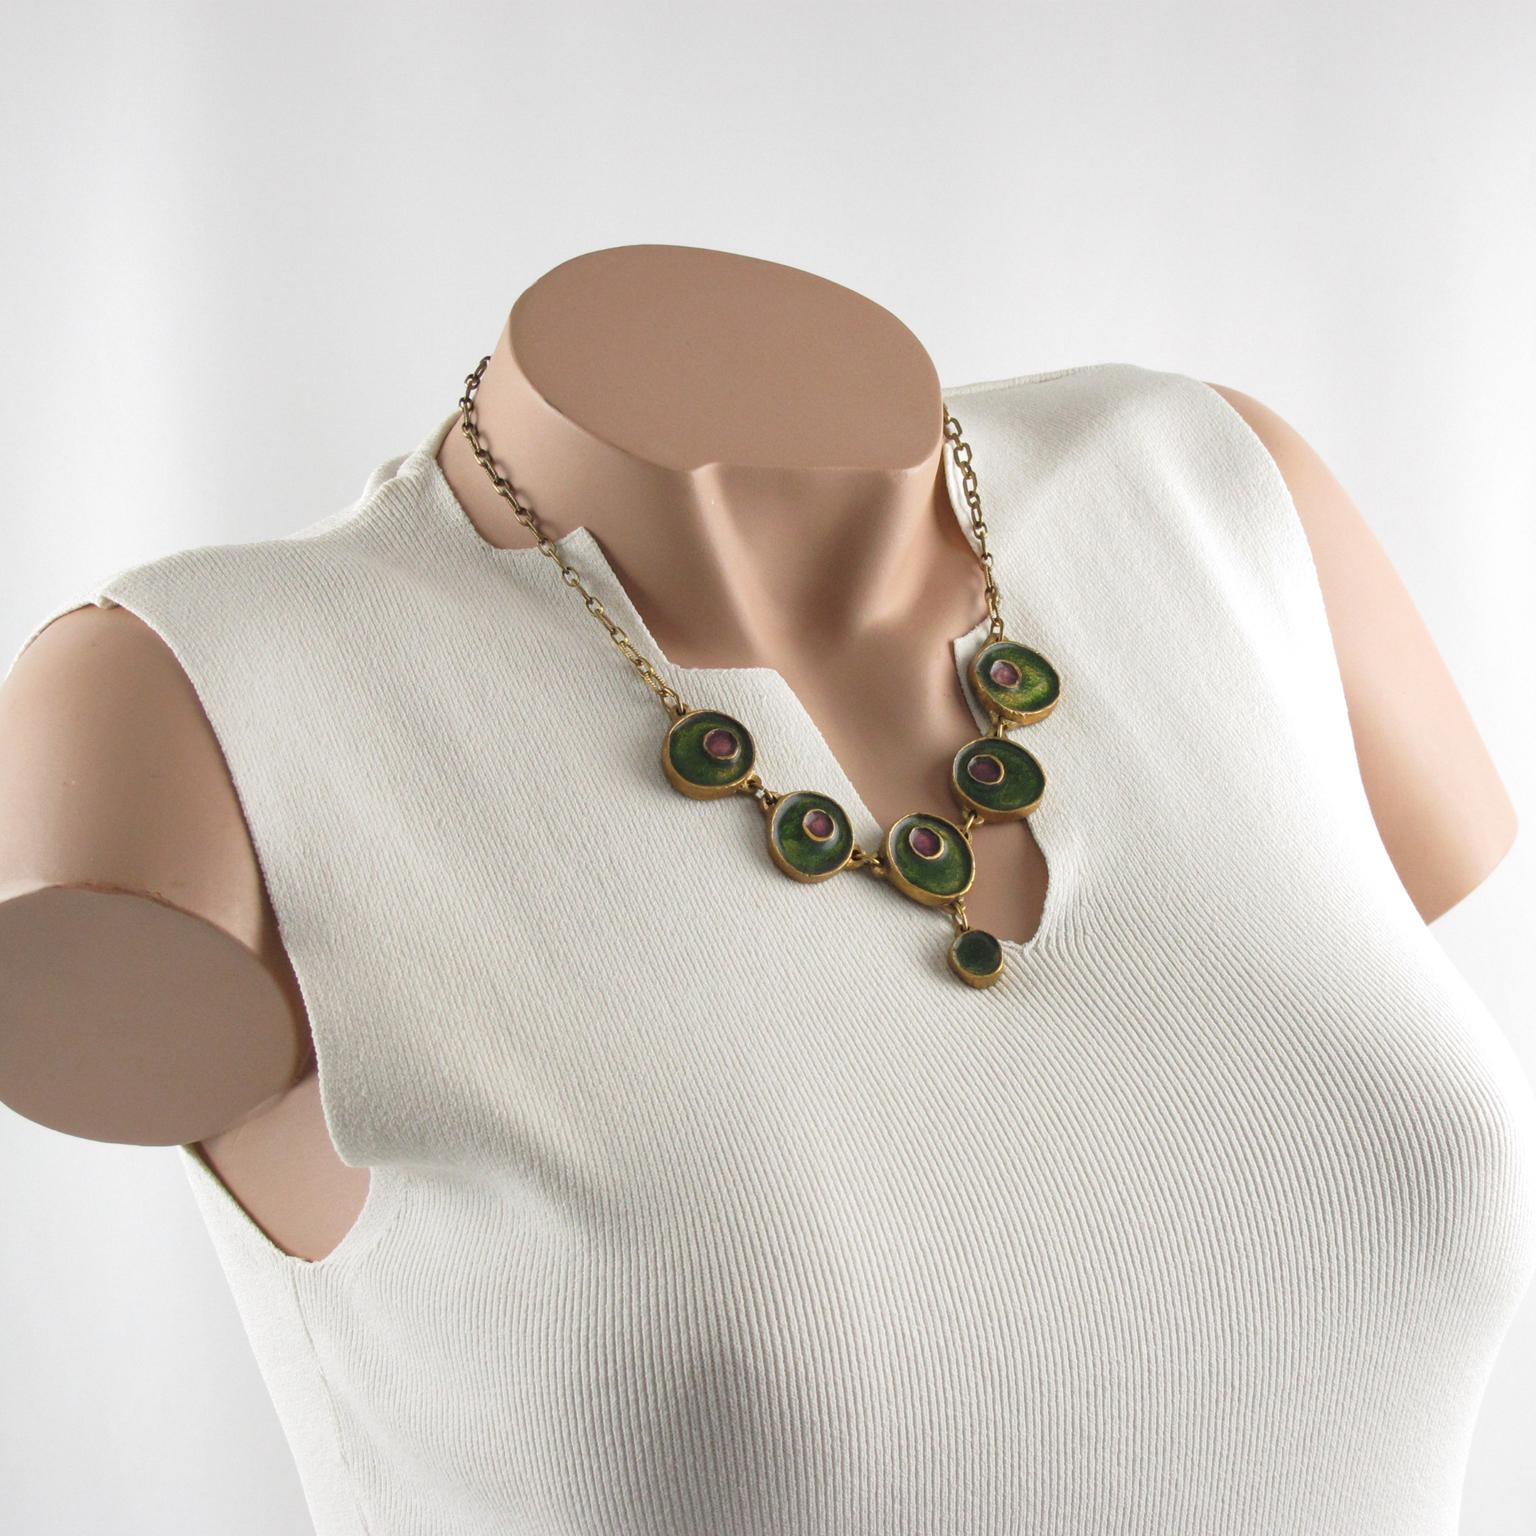 This lovely French modernist bronze choker necklace features five geometric dangling charm elements and rounded free-forms topped with green and purple enamel. The piece boasts a nice textured gilt metal chain with a lobster closing clasp. There is